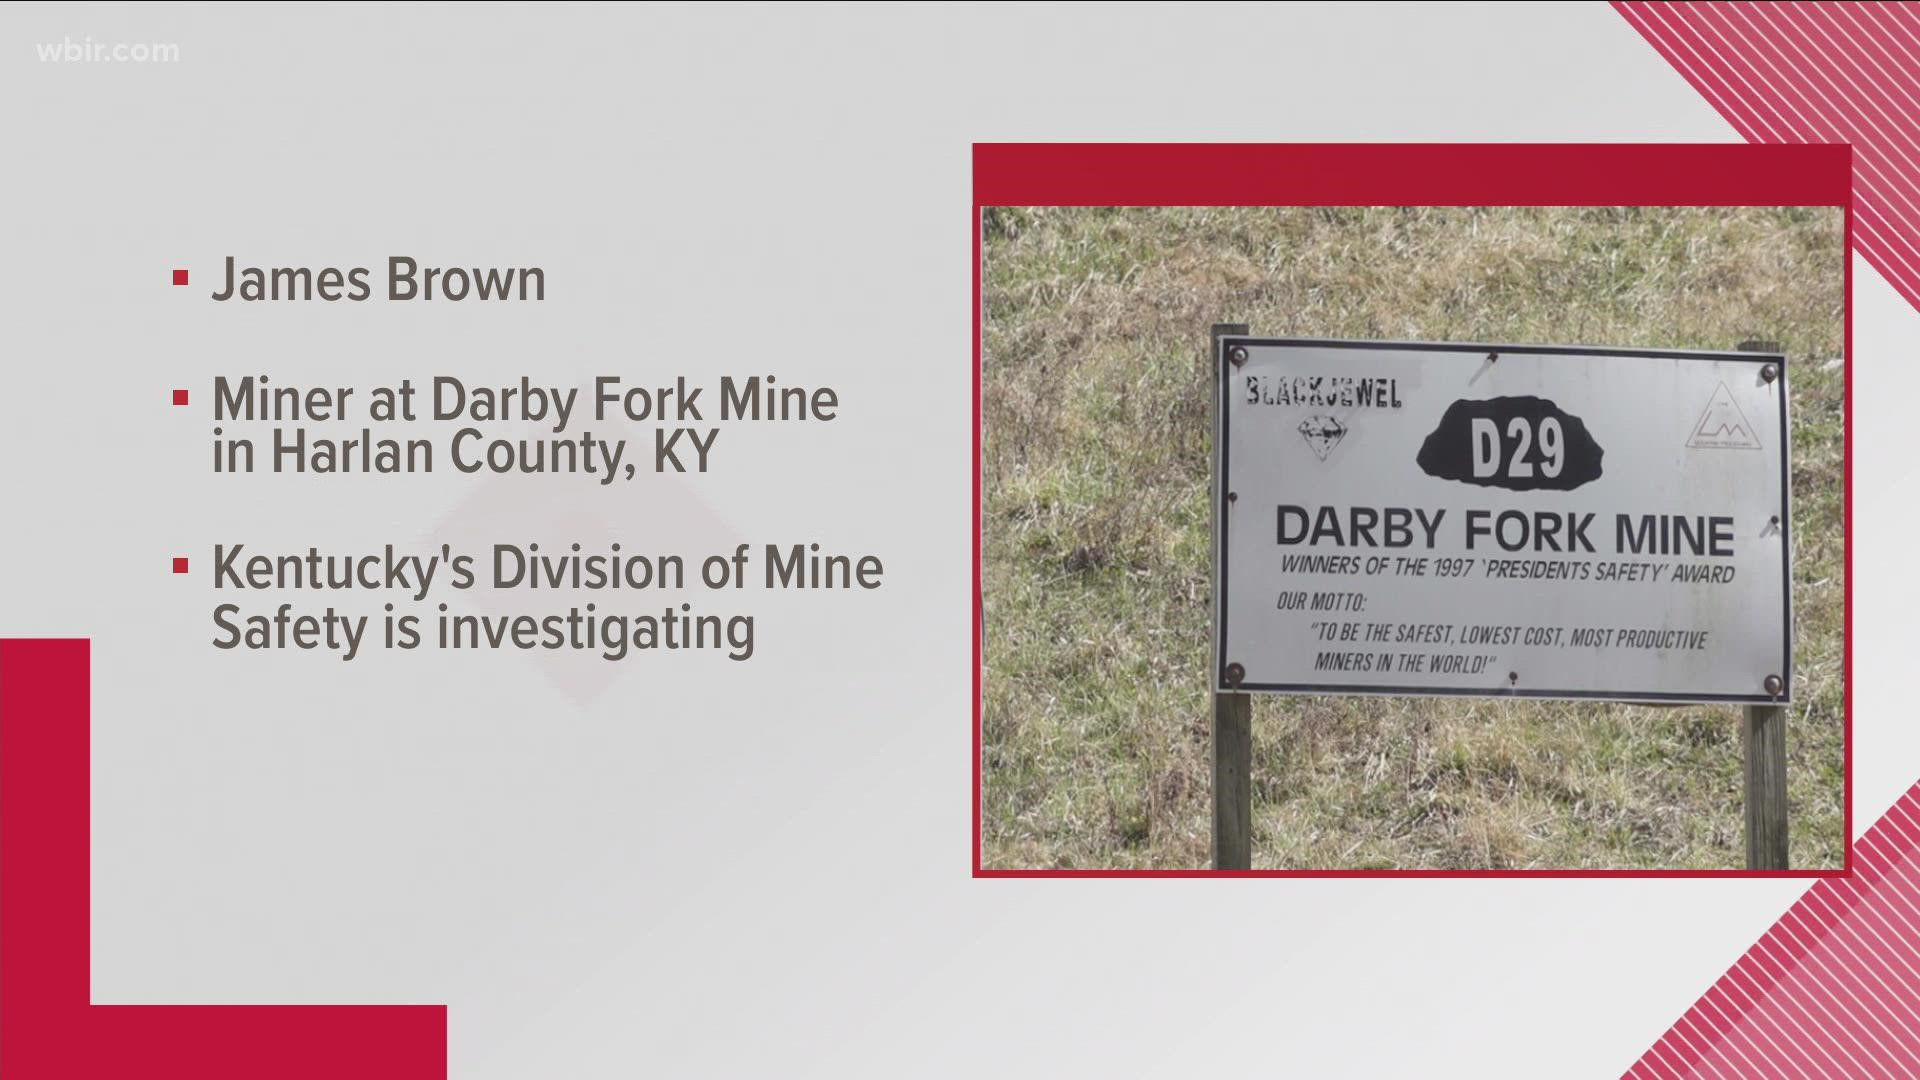 Late Sunday night, James D. Brown was working in the Darby Fork Mine in Harlan County when the roof collapsed.